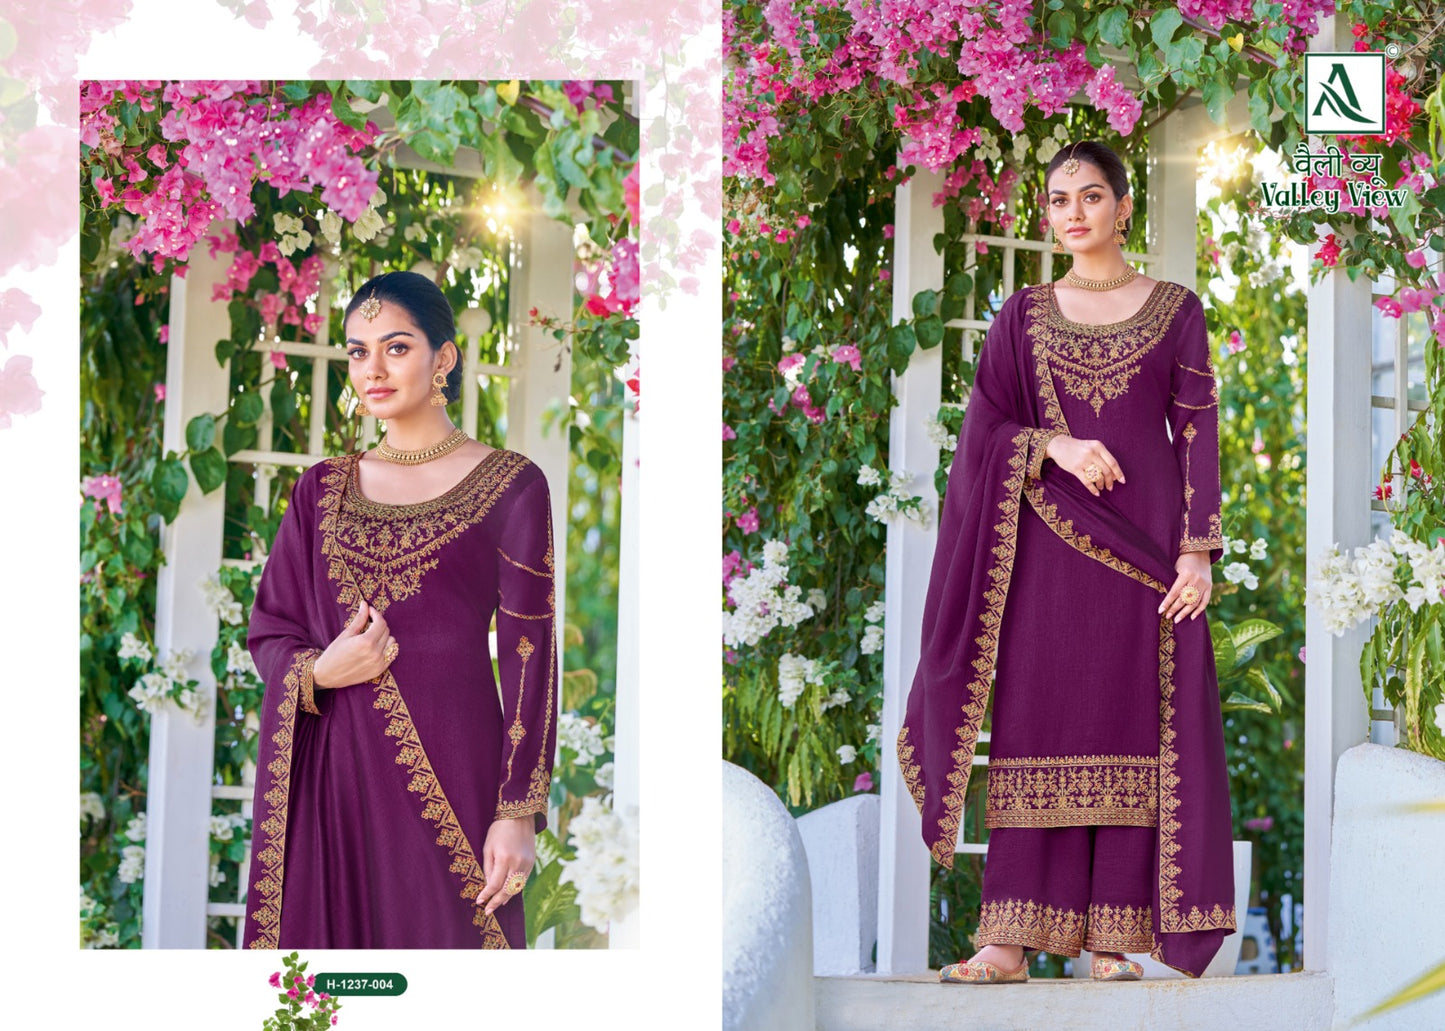 Valley View Alok Silk Plazzo Style Suits